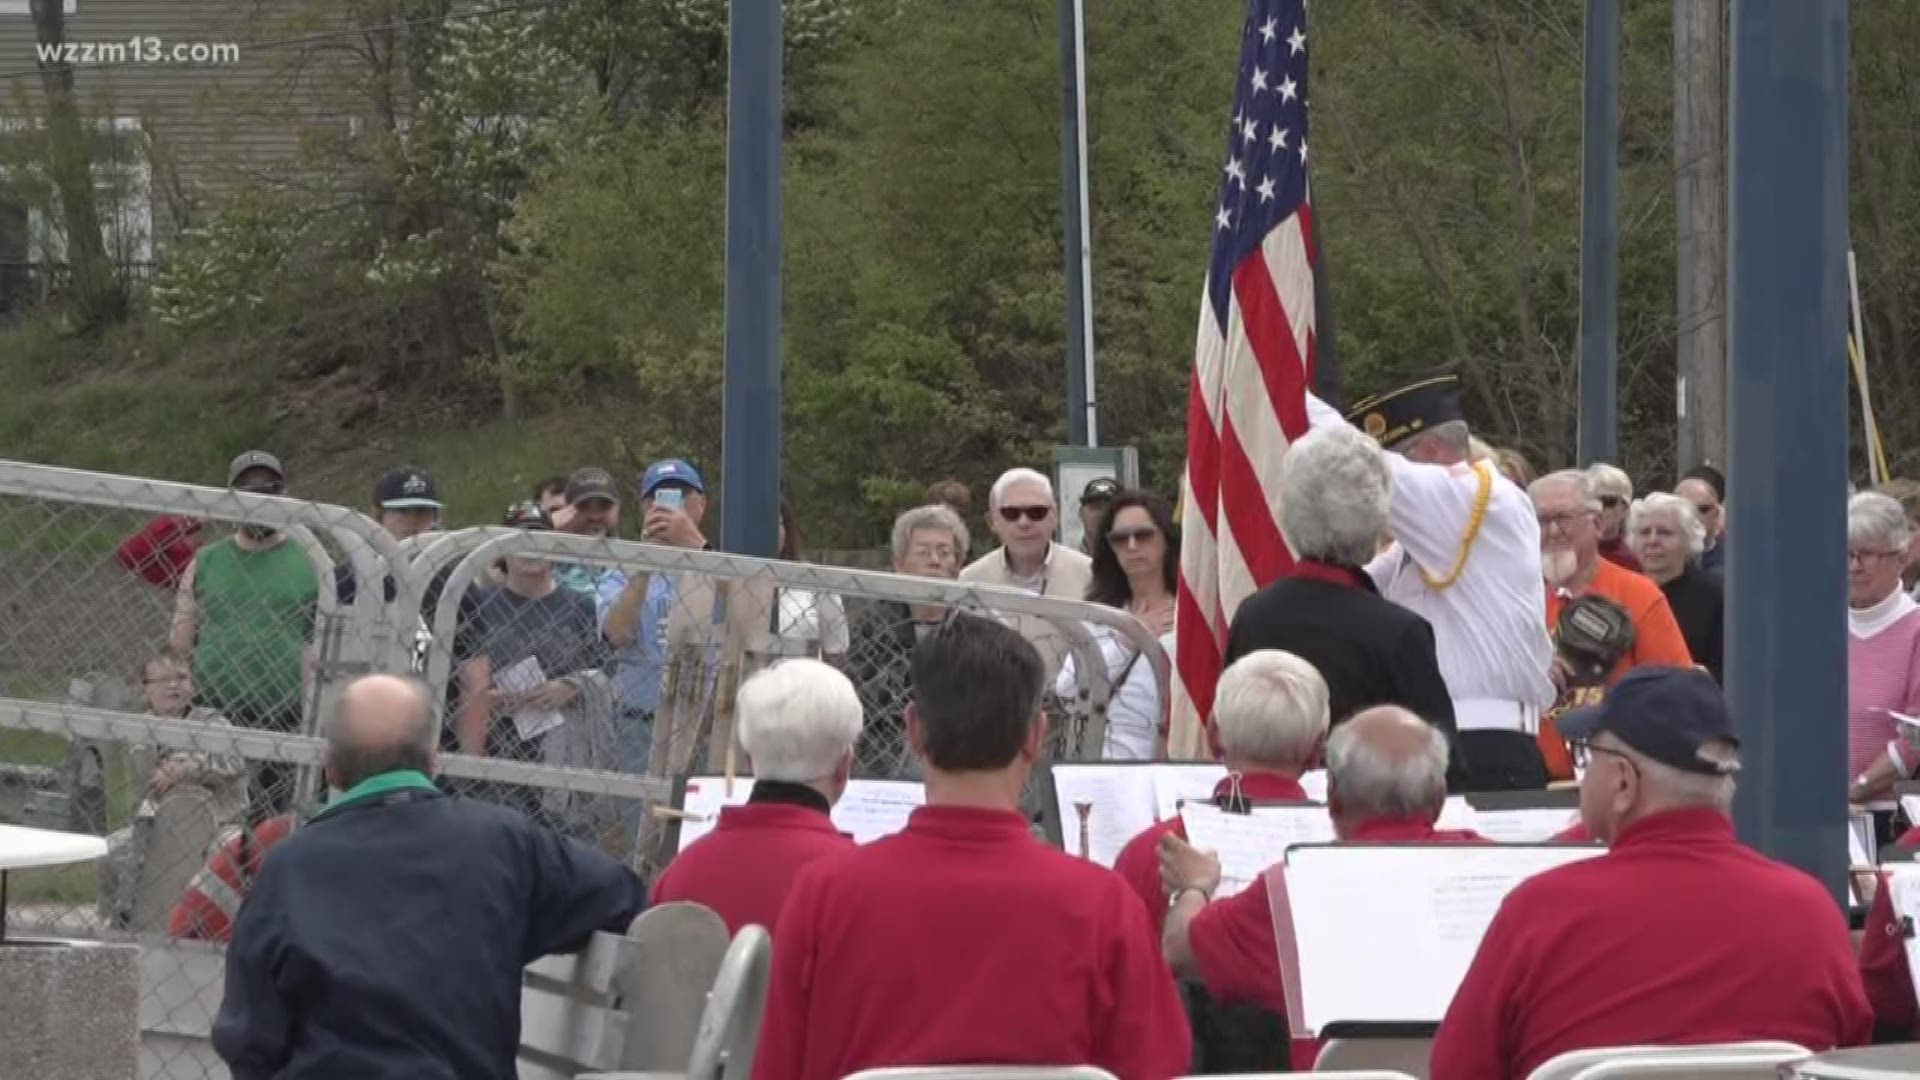 Lost ship event in Muskegon honors fallen soldiers